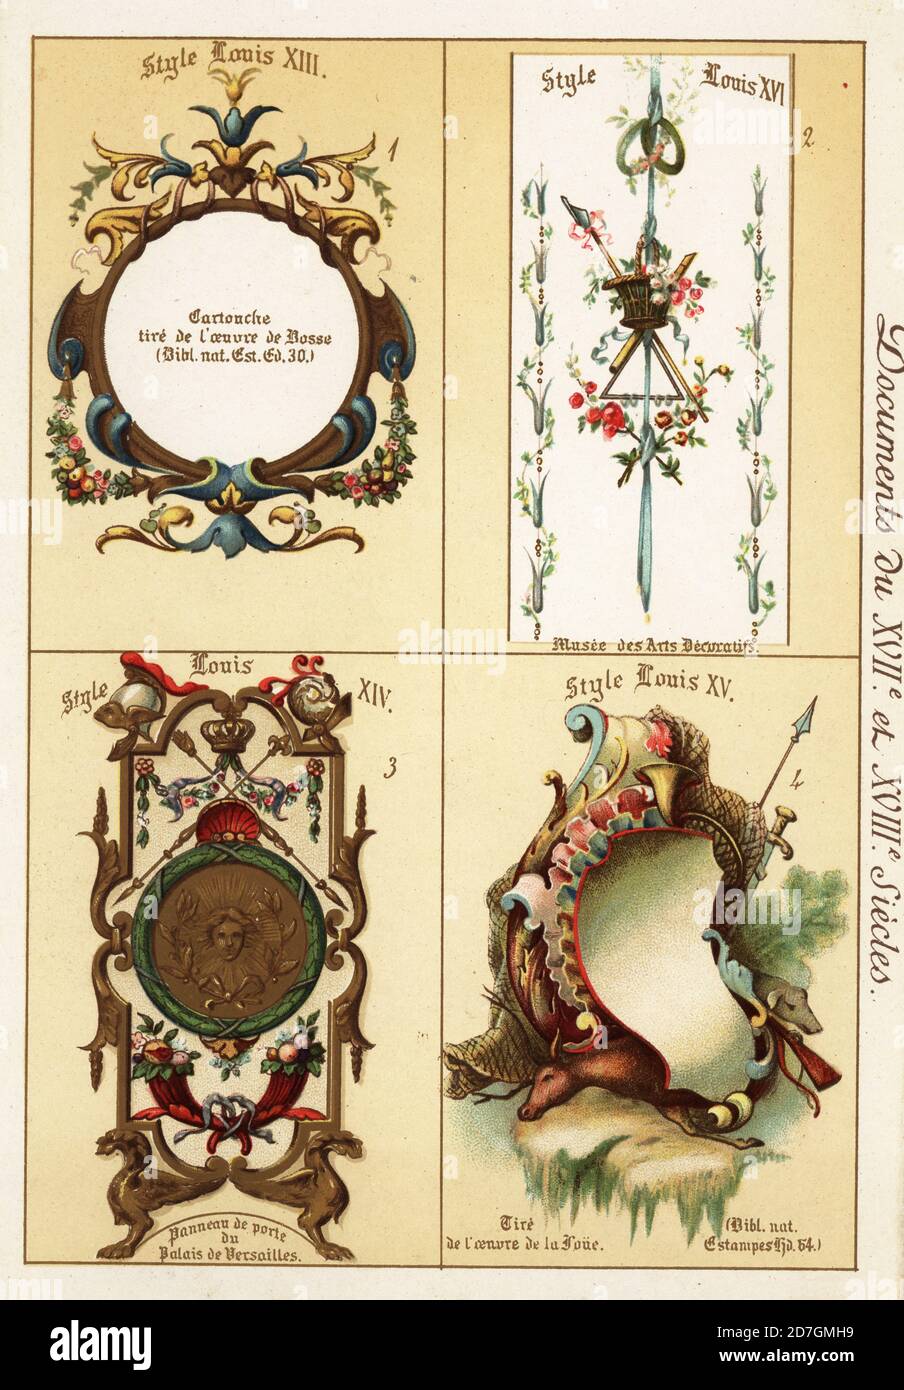 Decorative features from the eras of Louis XIII, Louis XIV, the Sun King, and Louis XVI. Cartouche by Abraham Bosse, panel from a door in Versailles Palace, painting by Jacques de la Joue. L’oeuvre de Bosse, panneau de porte du palais de Versailles, oeuvre de la Joue. Chromolithograph designed and lithographed by Ernst Guillot from Elements d'Ornementation du XVIIe, et XVIIIe Siecle, Elements of Ornament of the 17th and 18th century, Renouard, Paris, 1890. Stock Photo